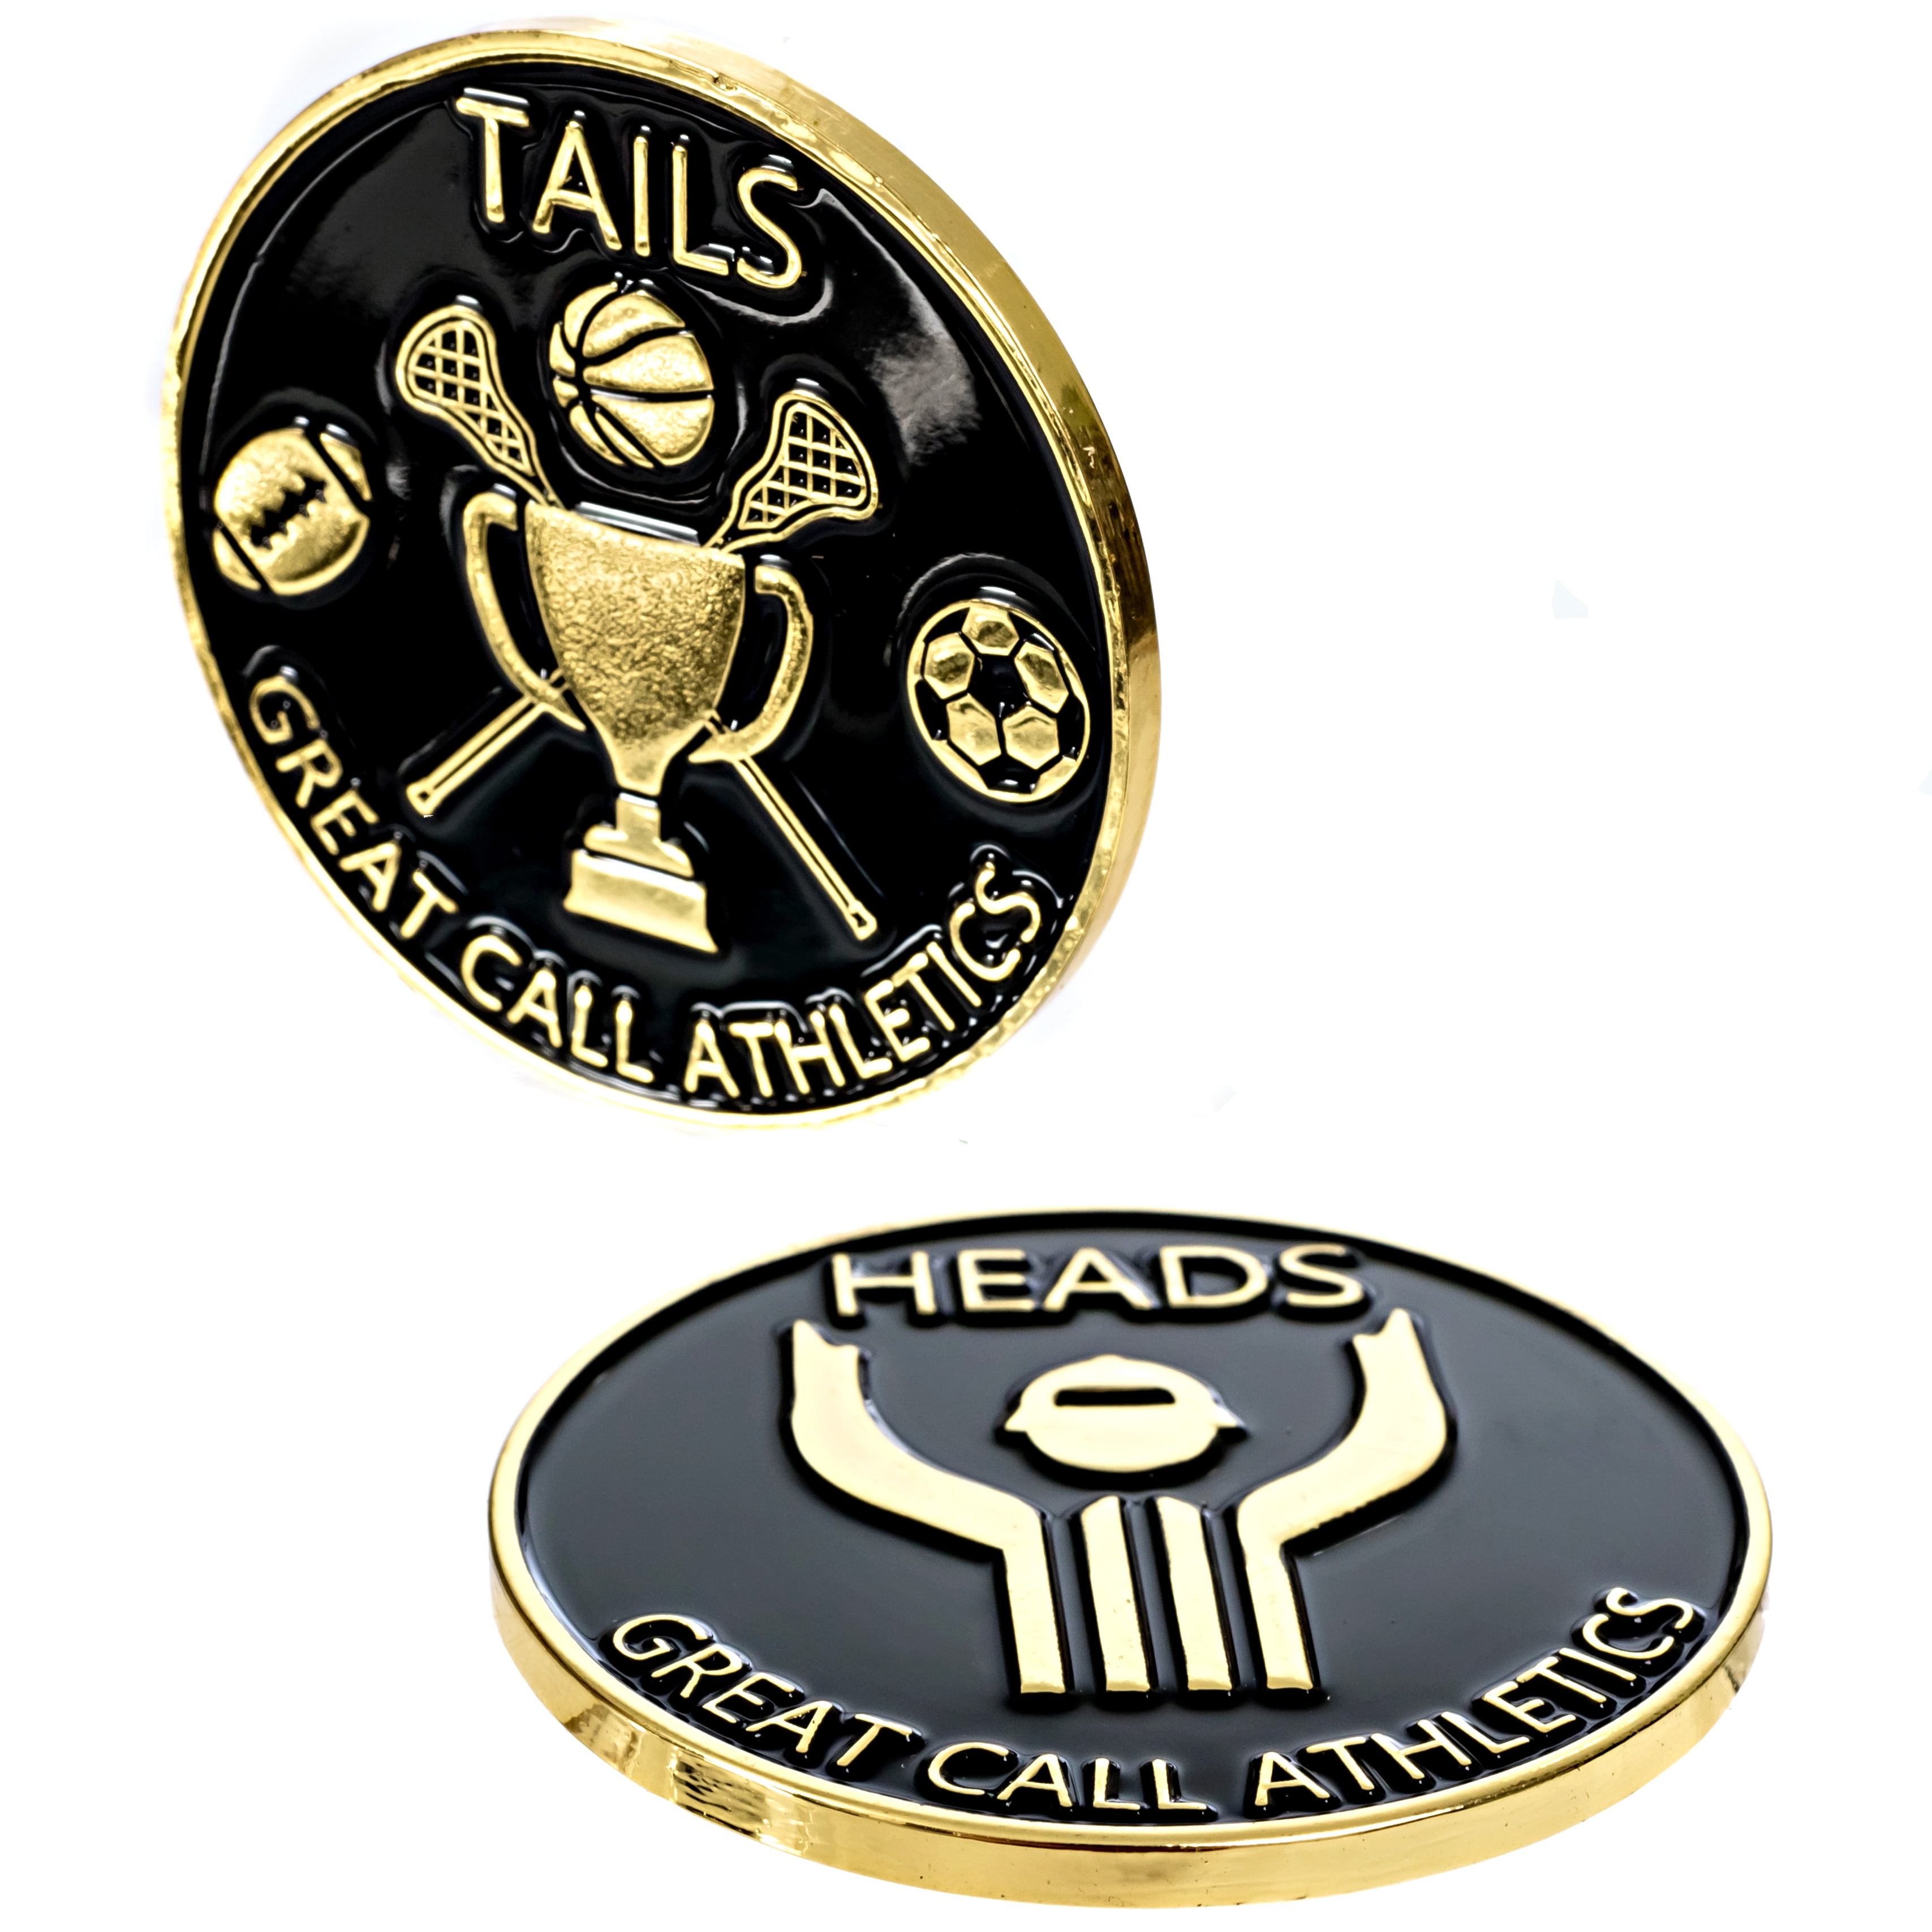 Great Call Athletics Official's Choice! Referee Official Flip Coin Football Soccer Volleyball Lacrosse 